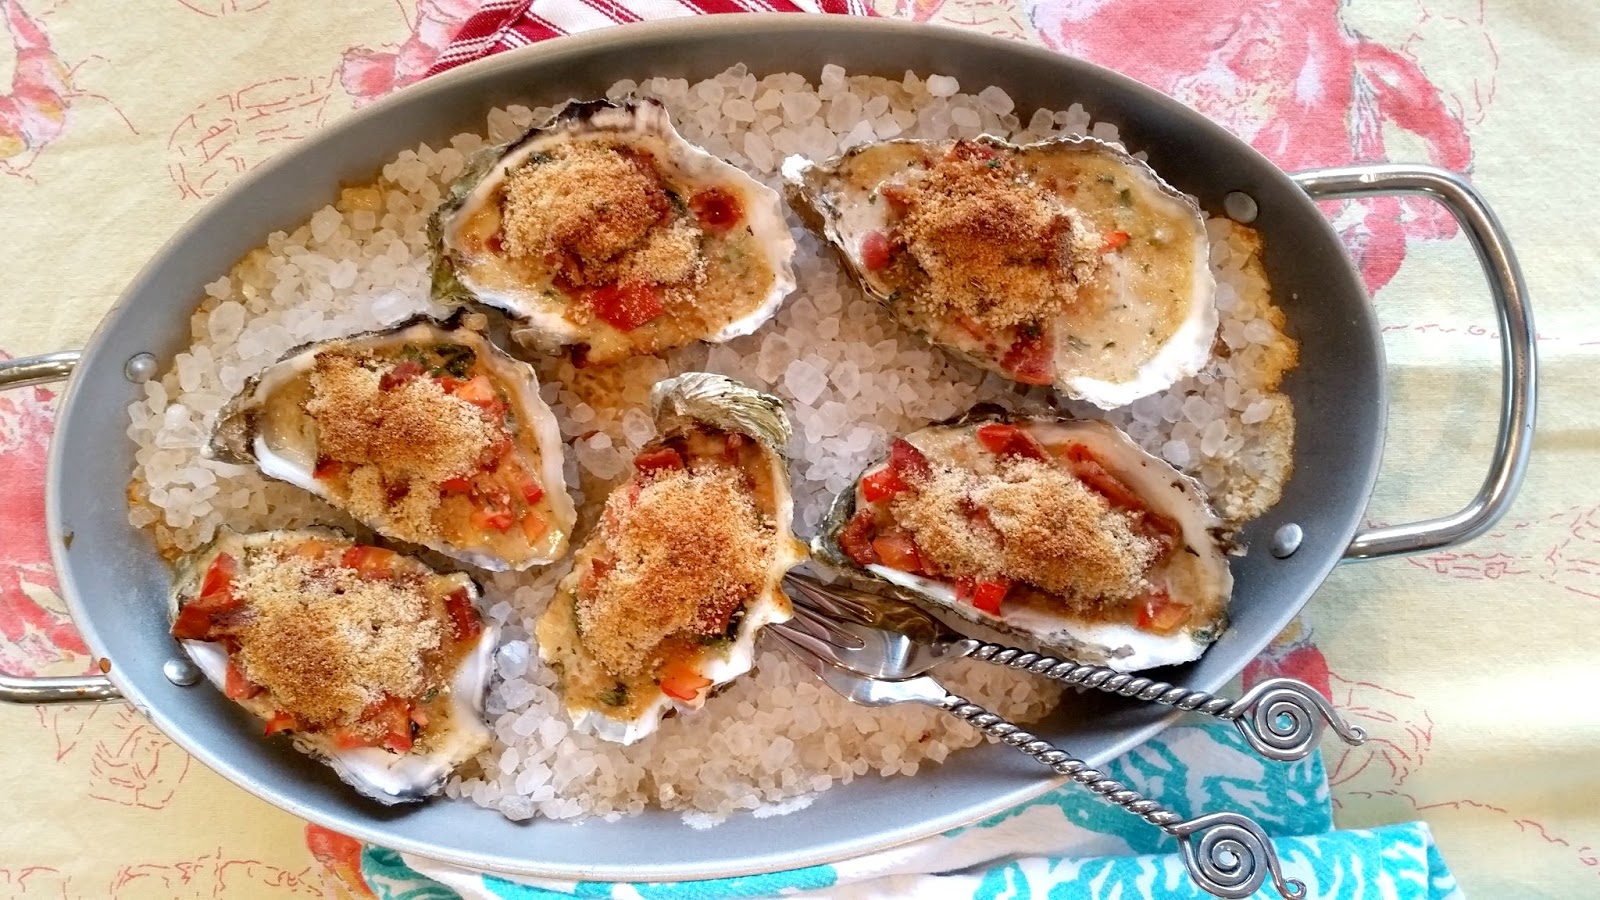 Vermouth Baked Oysters in Rock Salt